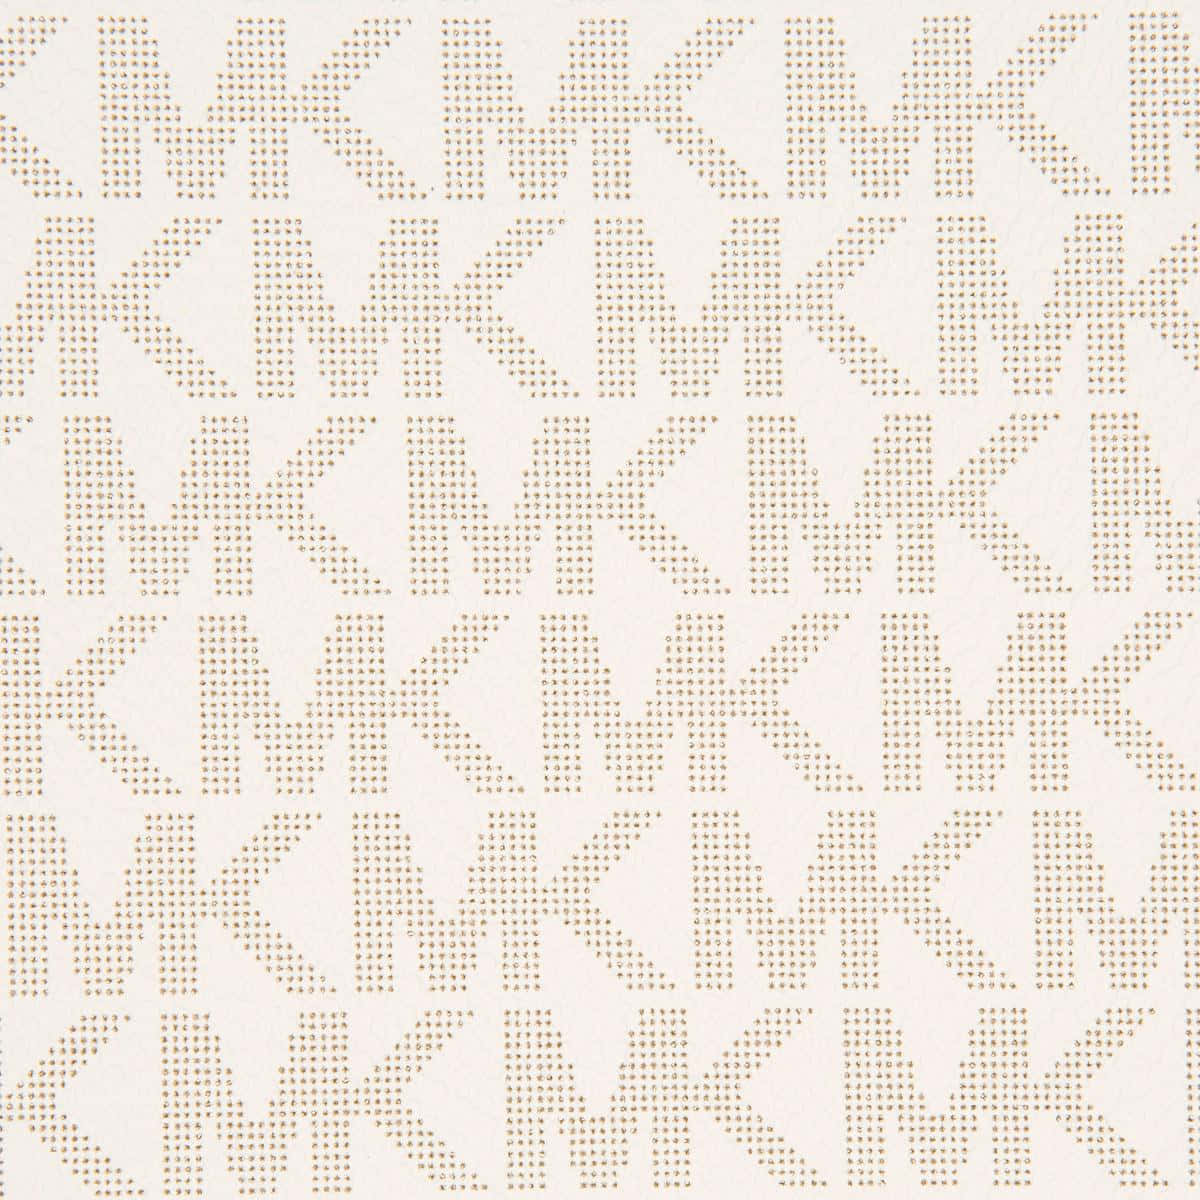 Download on trend luxury clothing with Michael Kors | Wallpapers.com